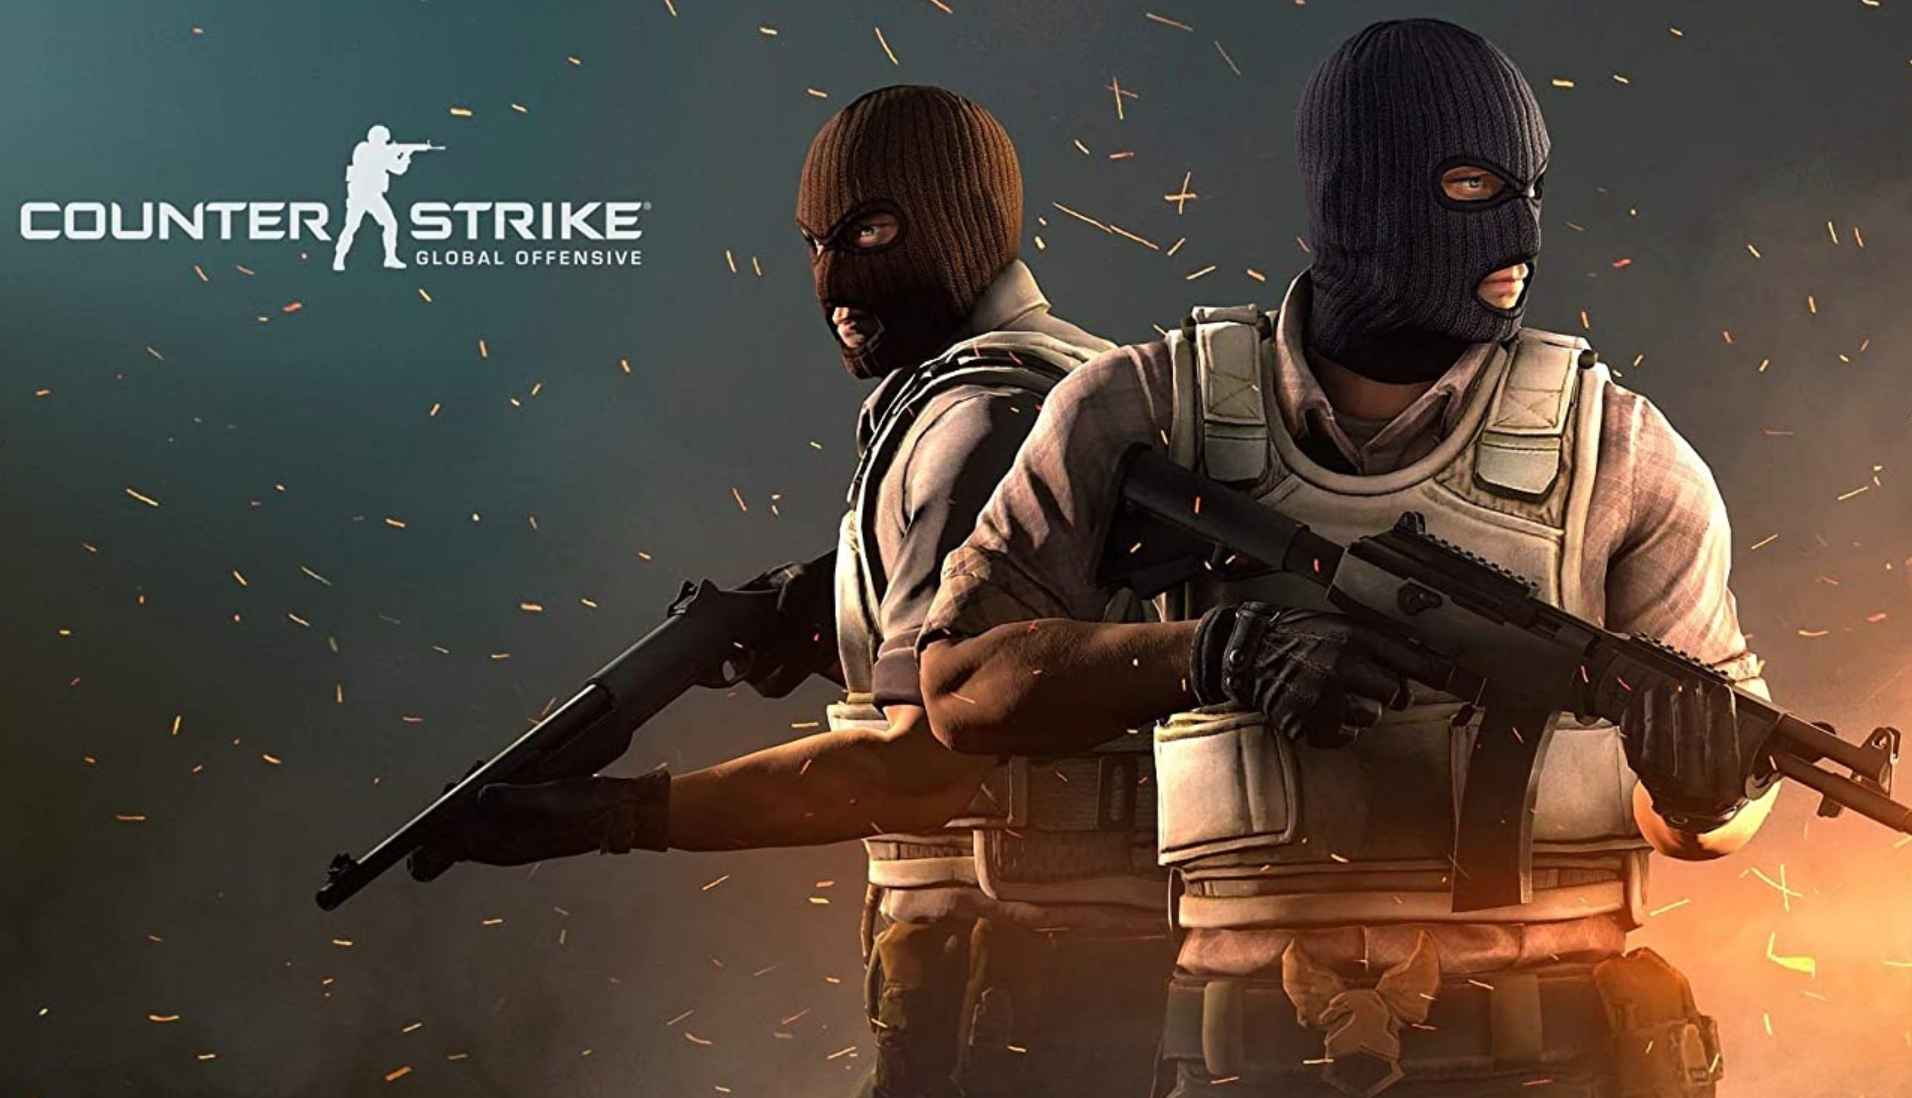 Top 12 Counter-Strike: Global Offensive Teams in the World Today